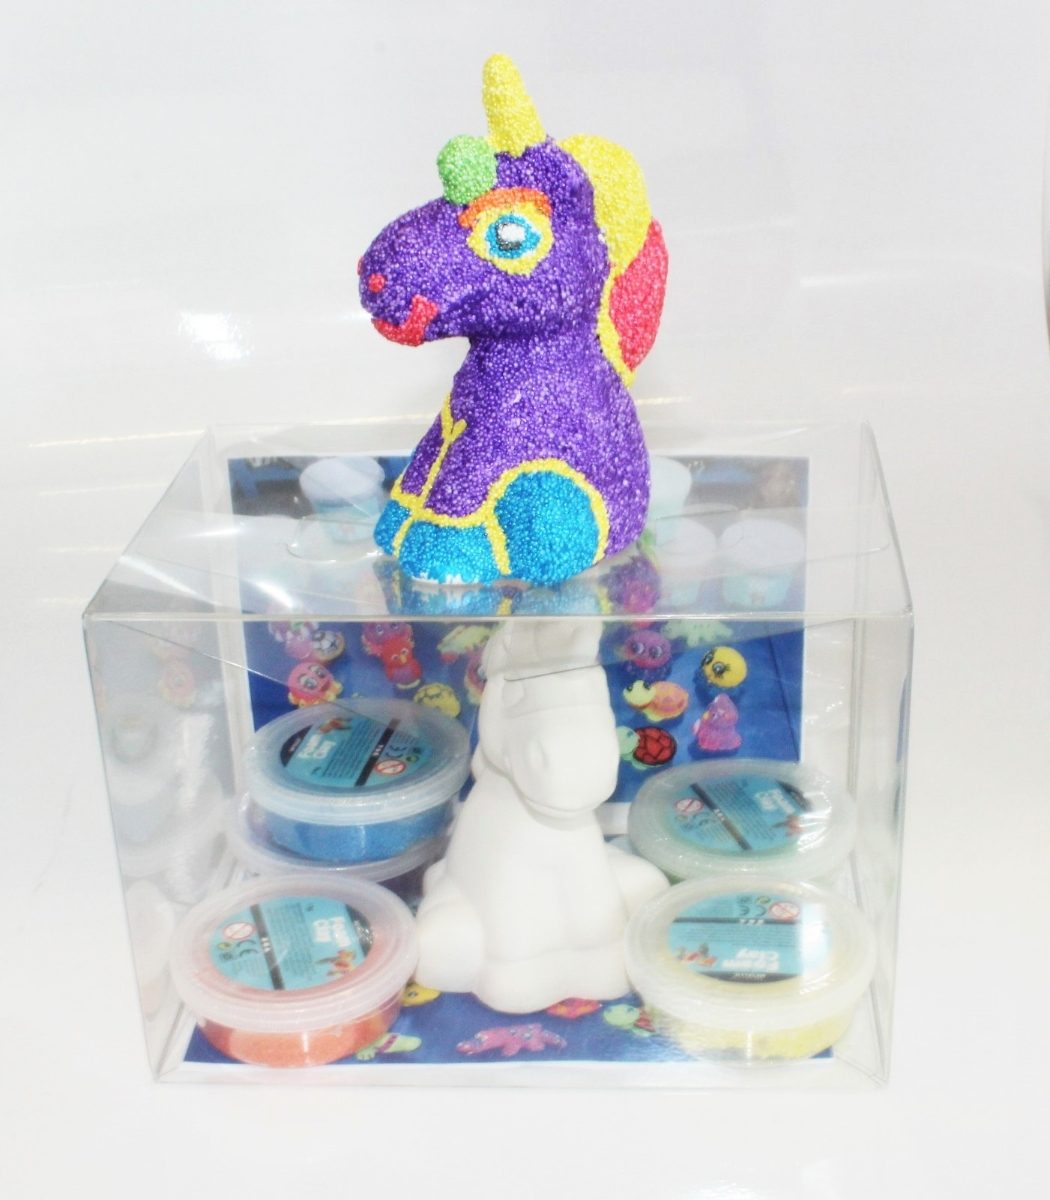 Take Out Box with Unicorn Party Animal and Foam Clay